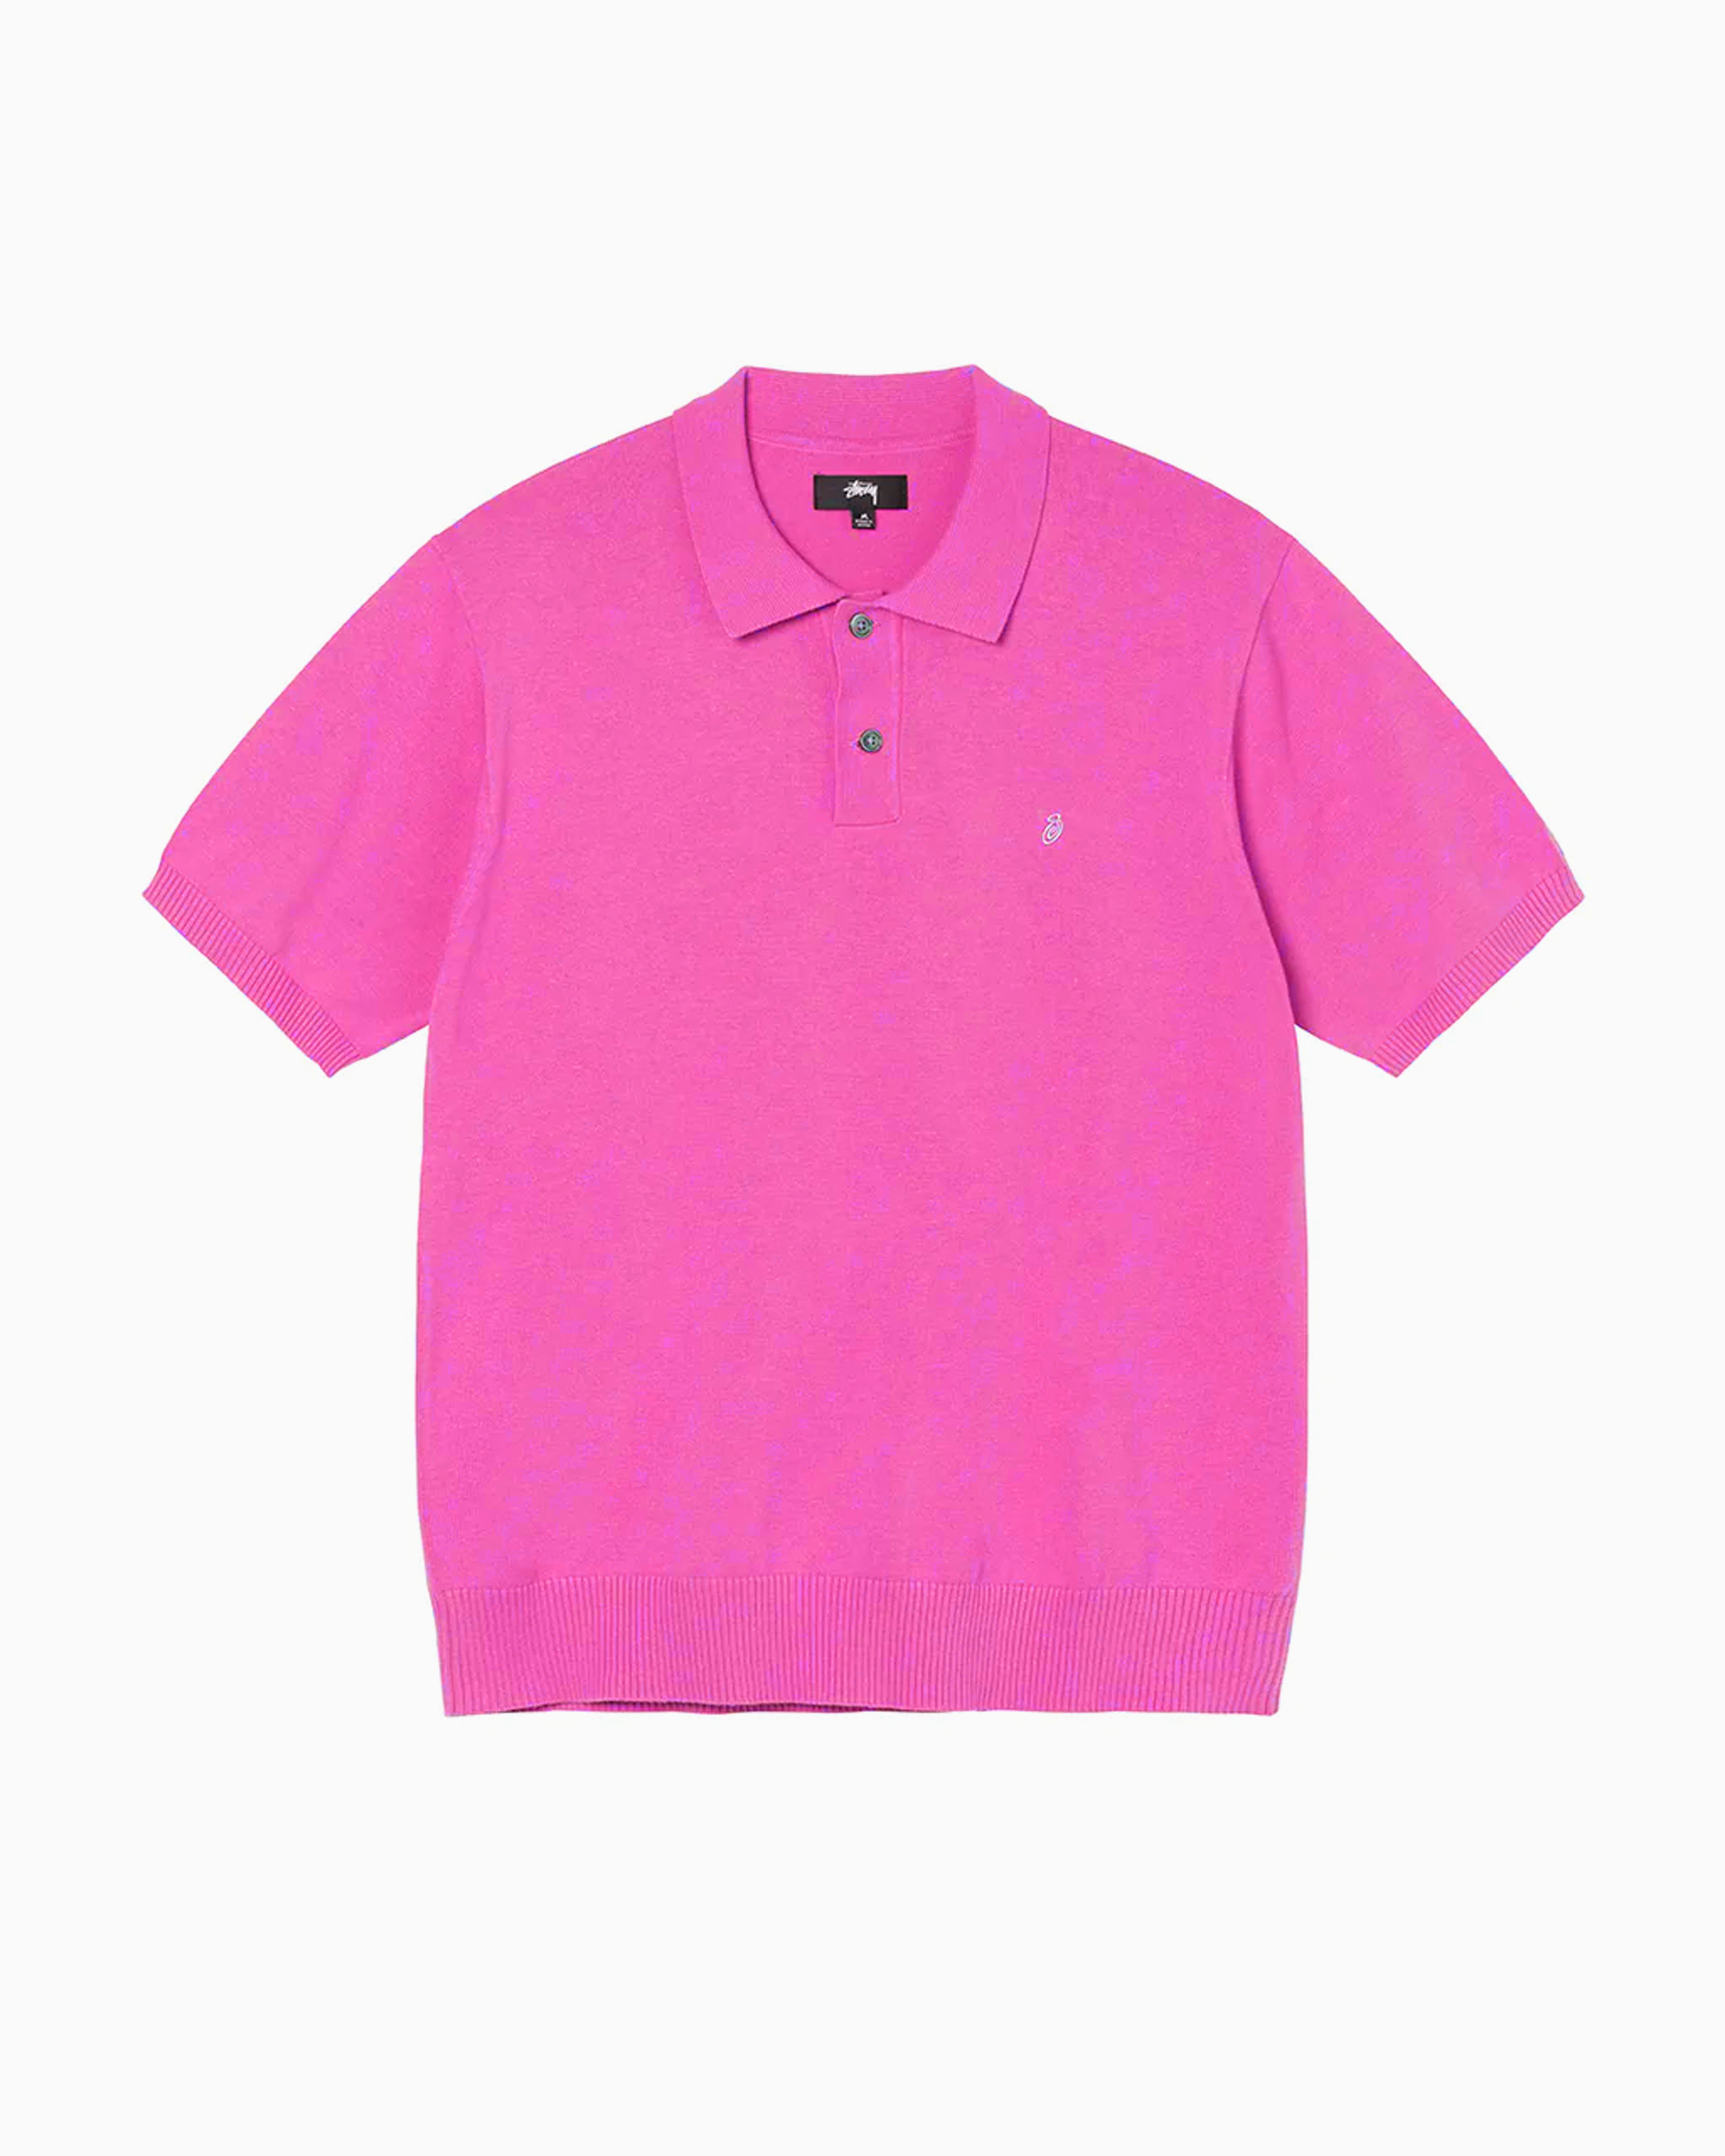 Classic SS Polo Sweater $ Stussy Tops Sweats & Hoodies Pink